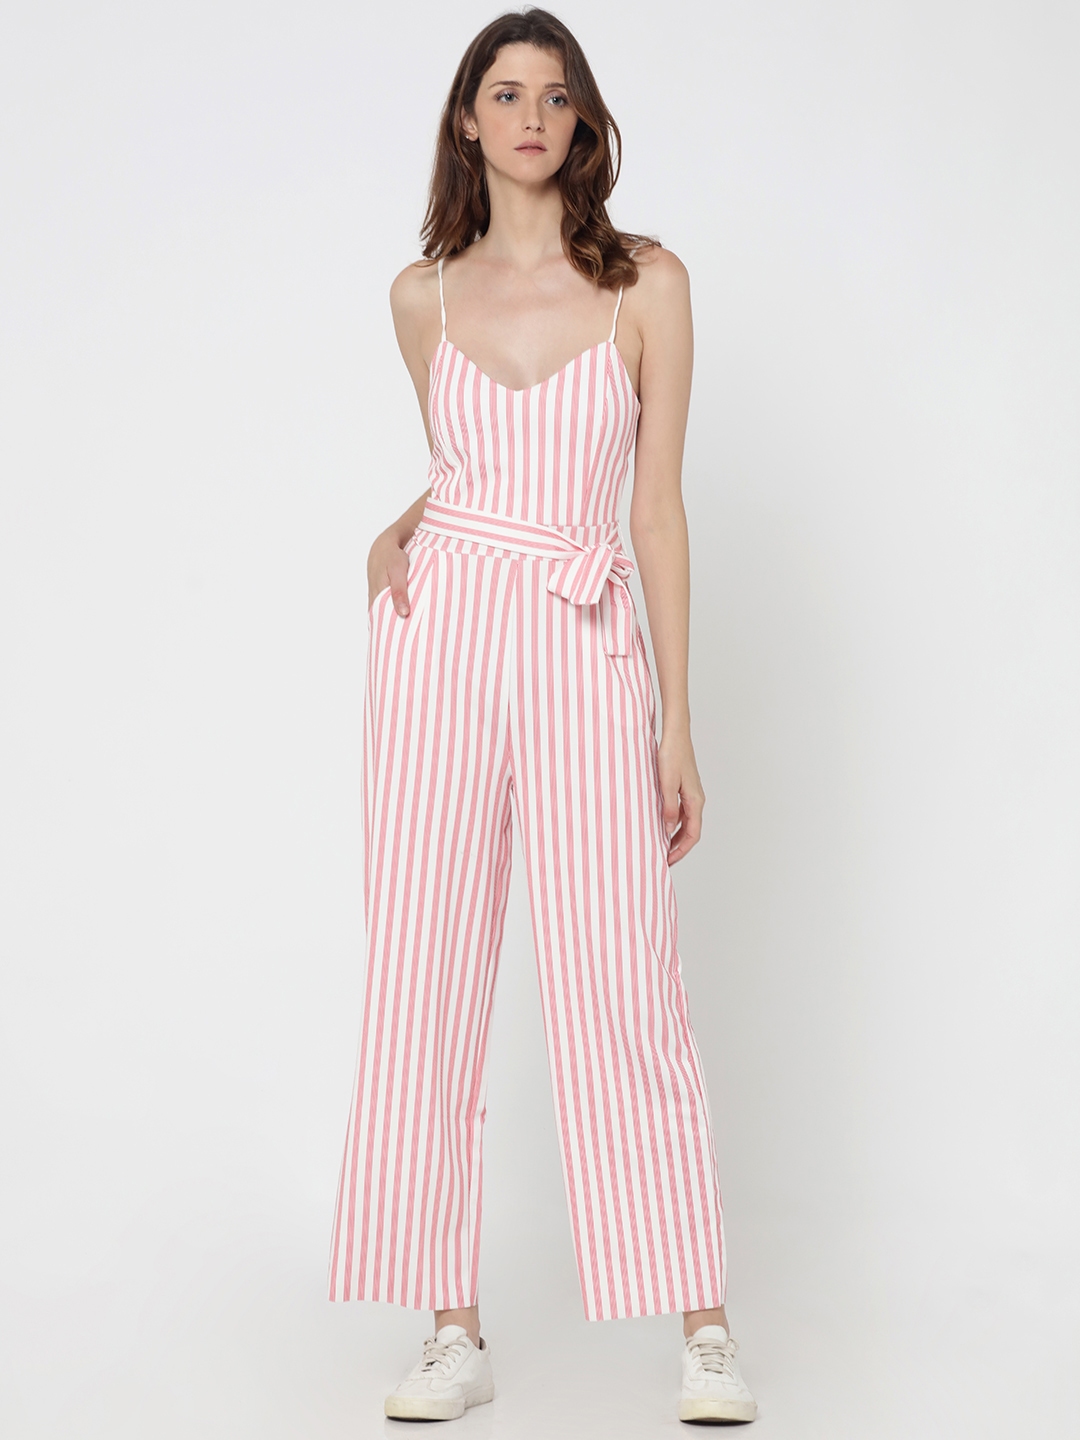 Buy ONLY White & Pink Striped Basic Jumpsuit - Jumpsuit for Women ...